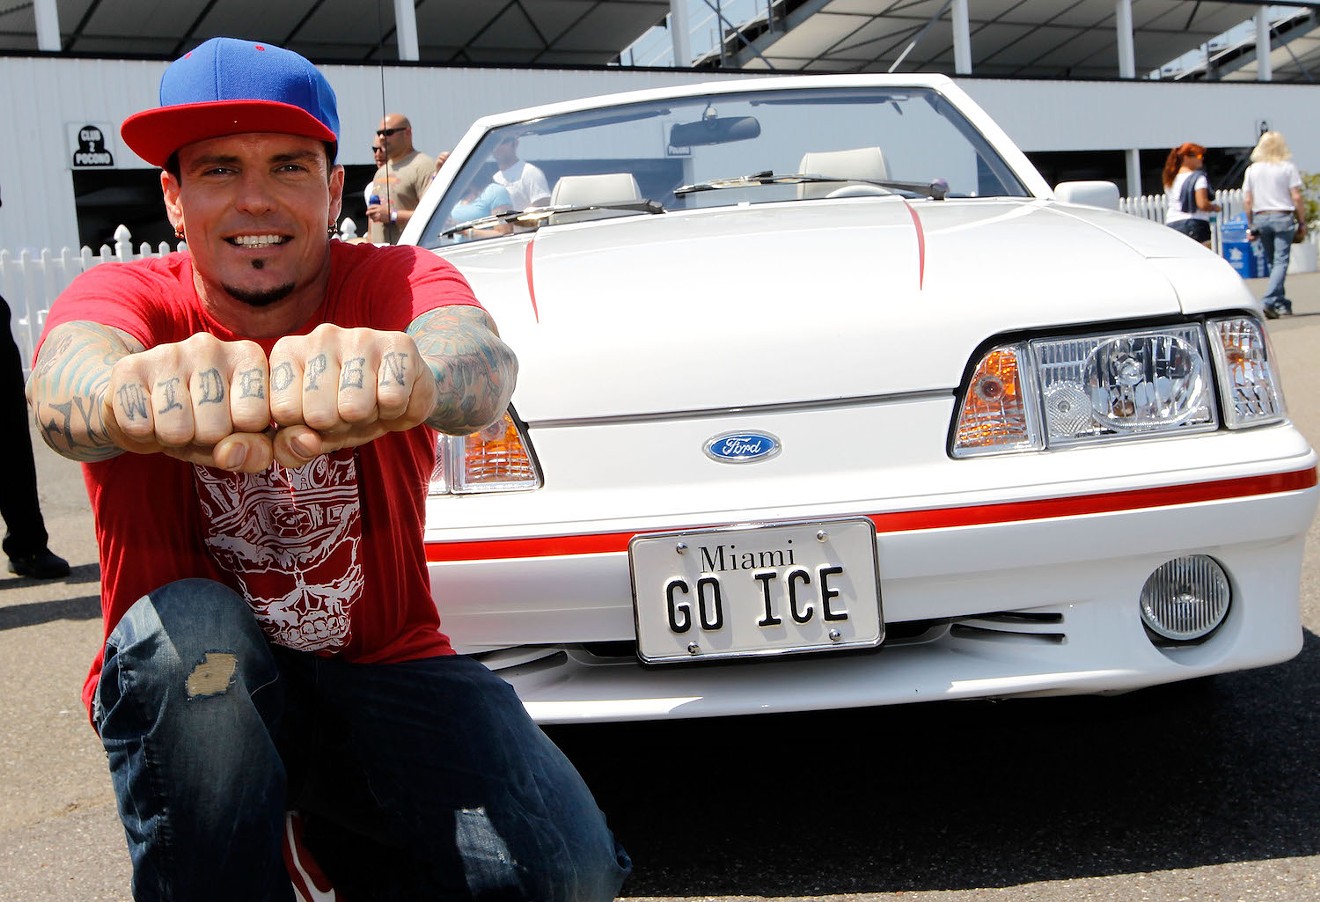 Vanilla Ice with a vintage Mustang before the start of the 2012 NASCAR Sprint Cup Series at Pocono Raceway in Long Pond, Pennsylvania.